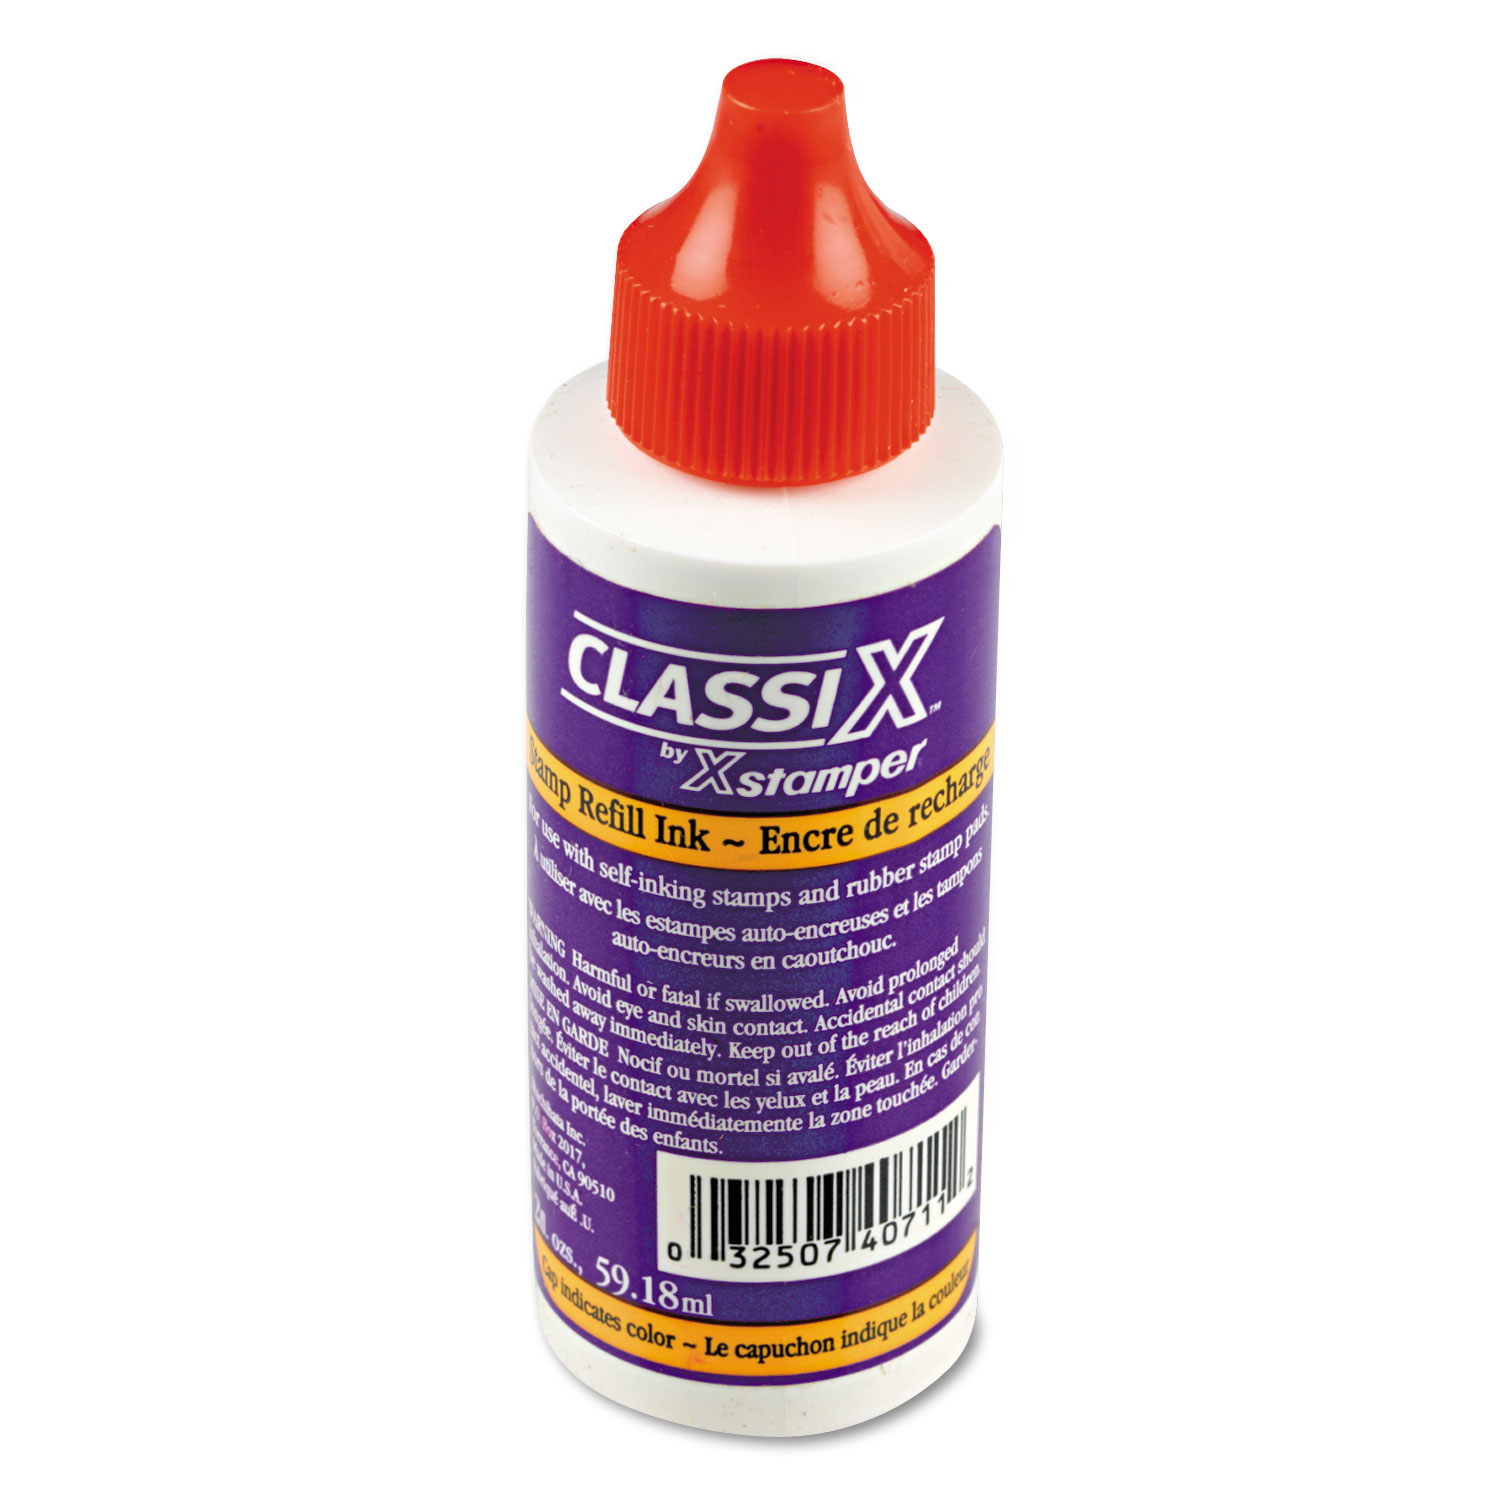 ClassiX® Refill Ink for Classix Stamps, 2 oz Bottle, Red